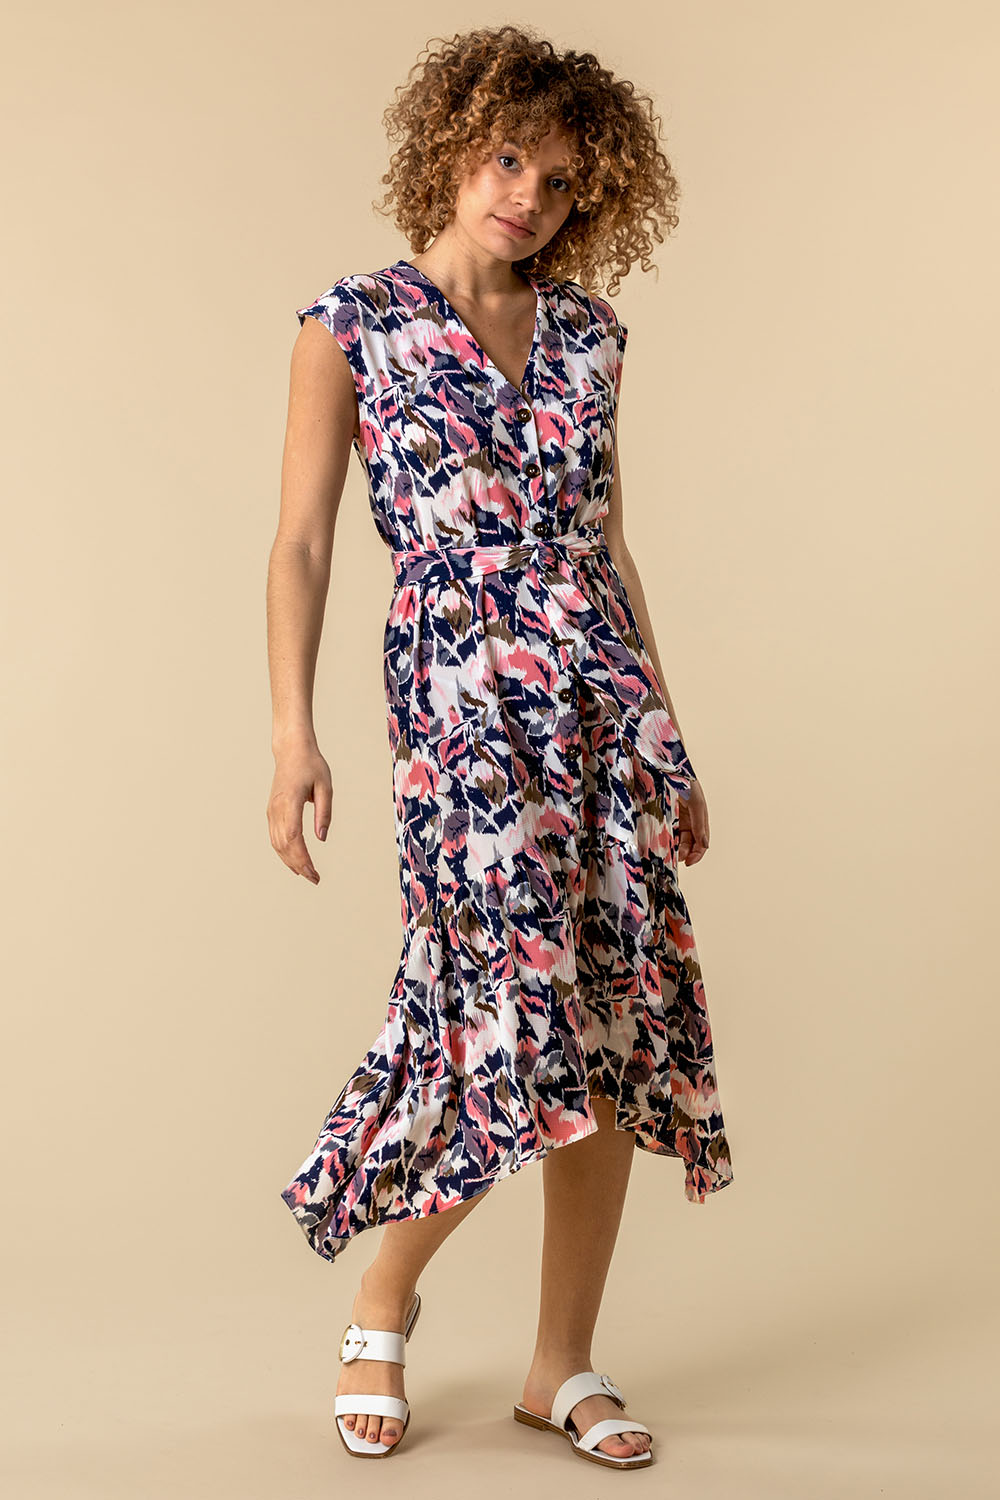 PINK Abstract Floral Print Button Down Dress, Image 2 of 4